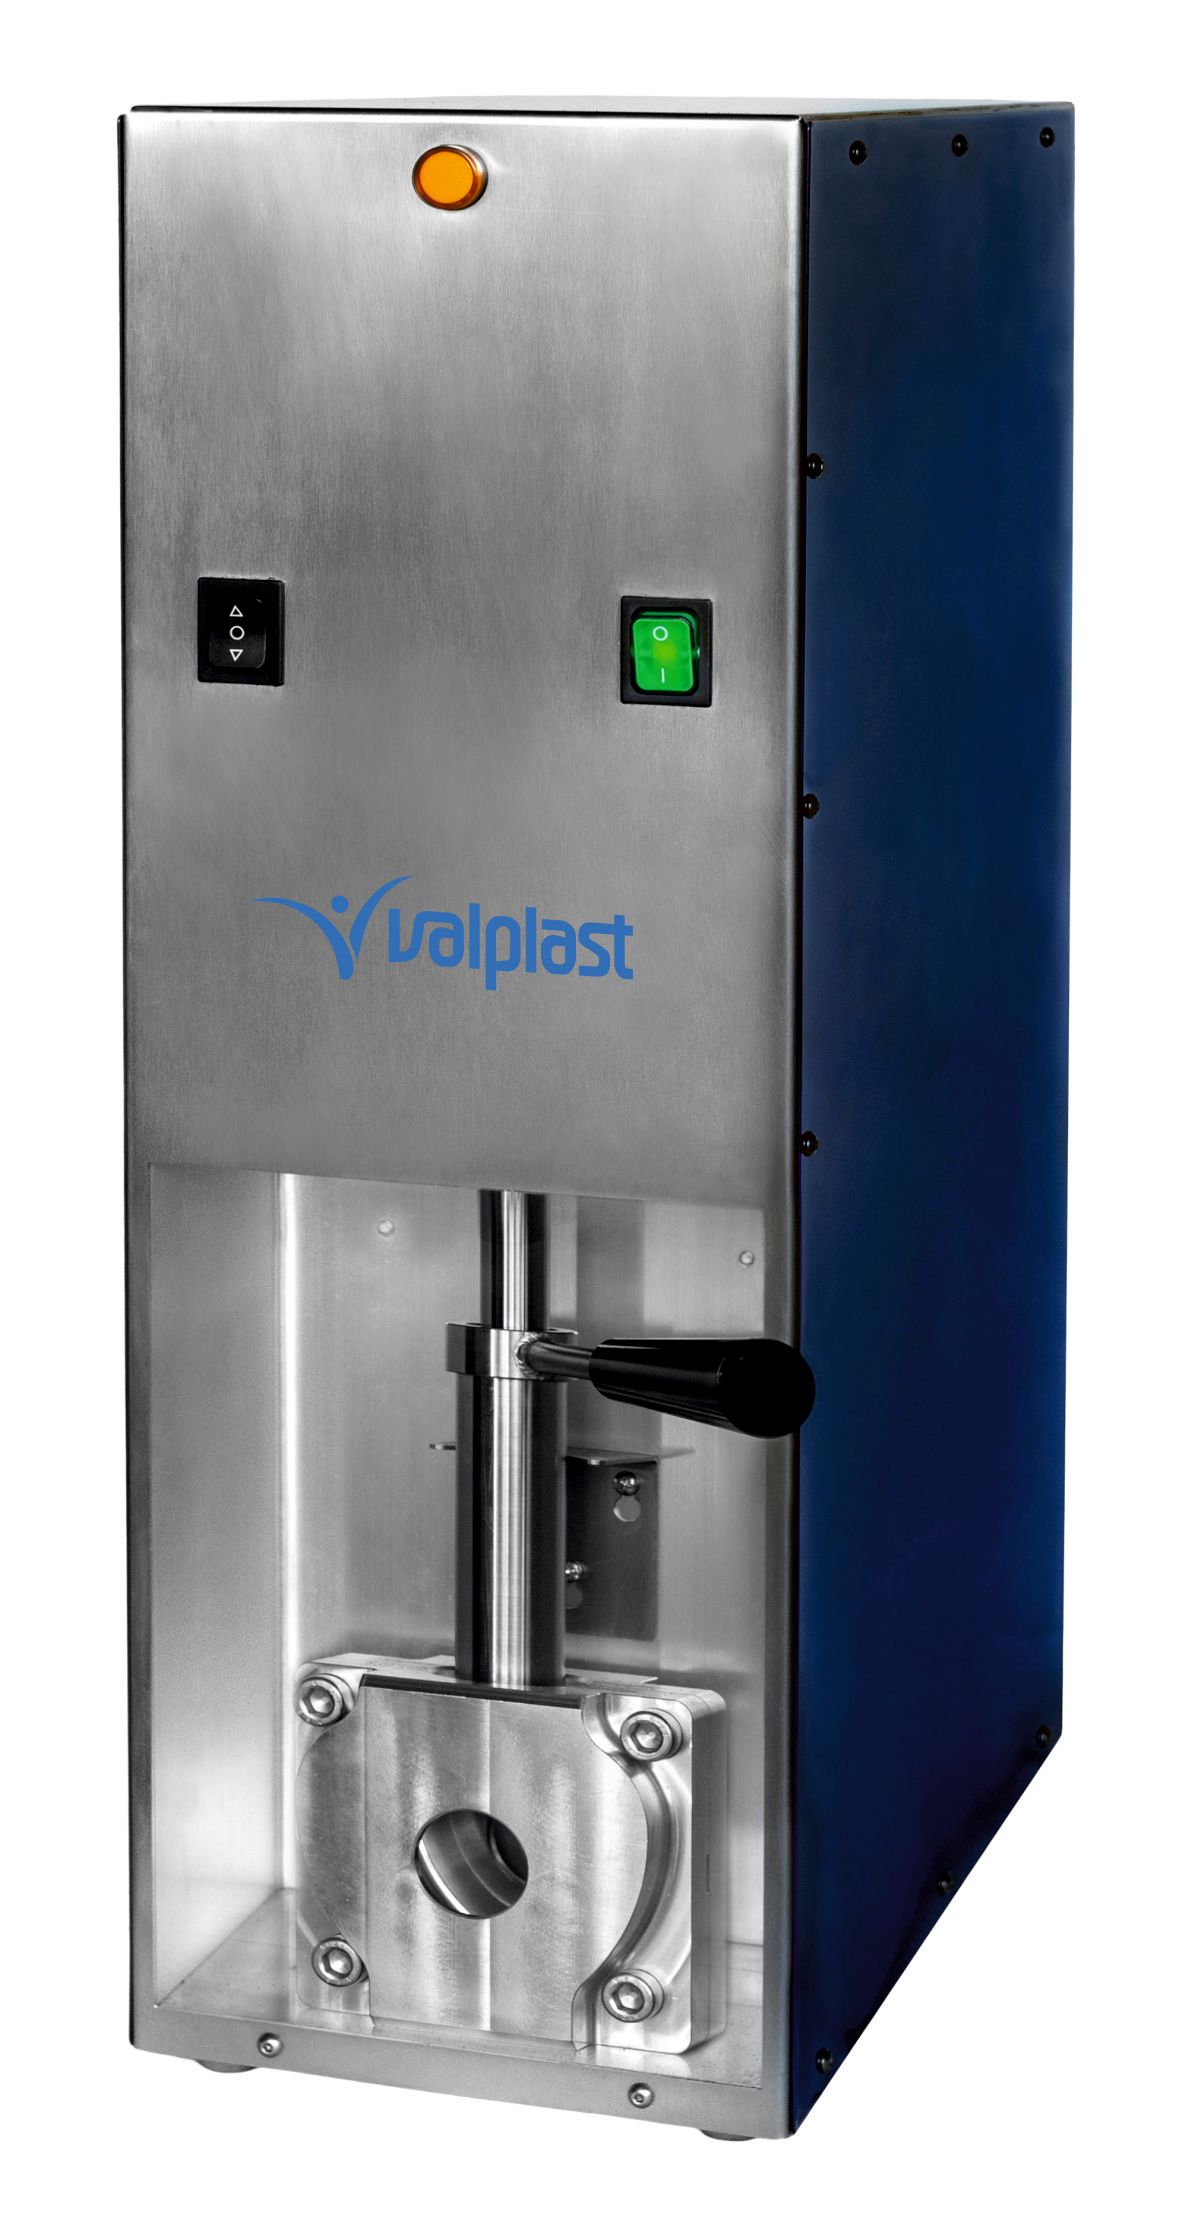 The all-new Hydraulic Press for Valplast Flexible Partial Dentures